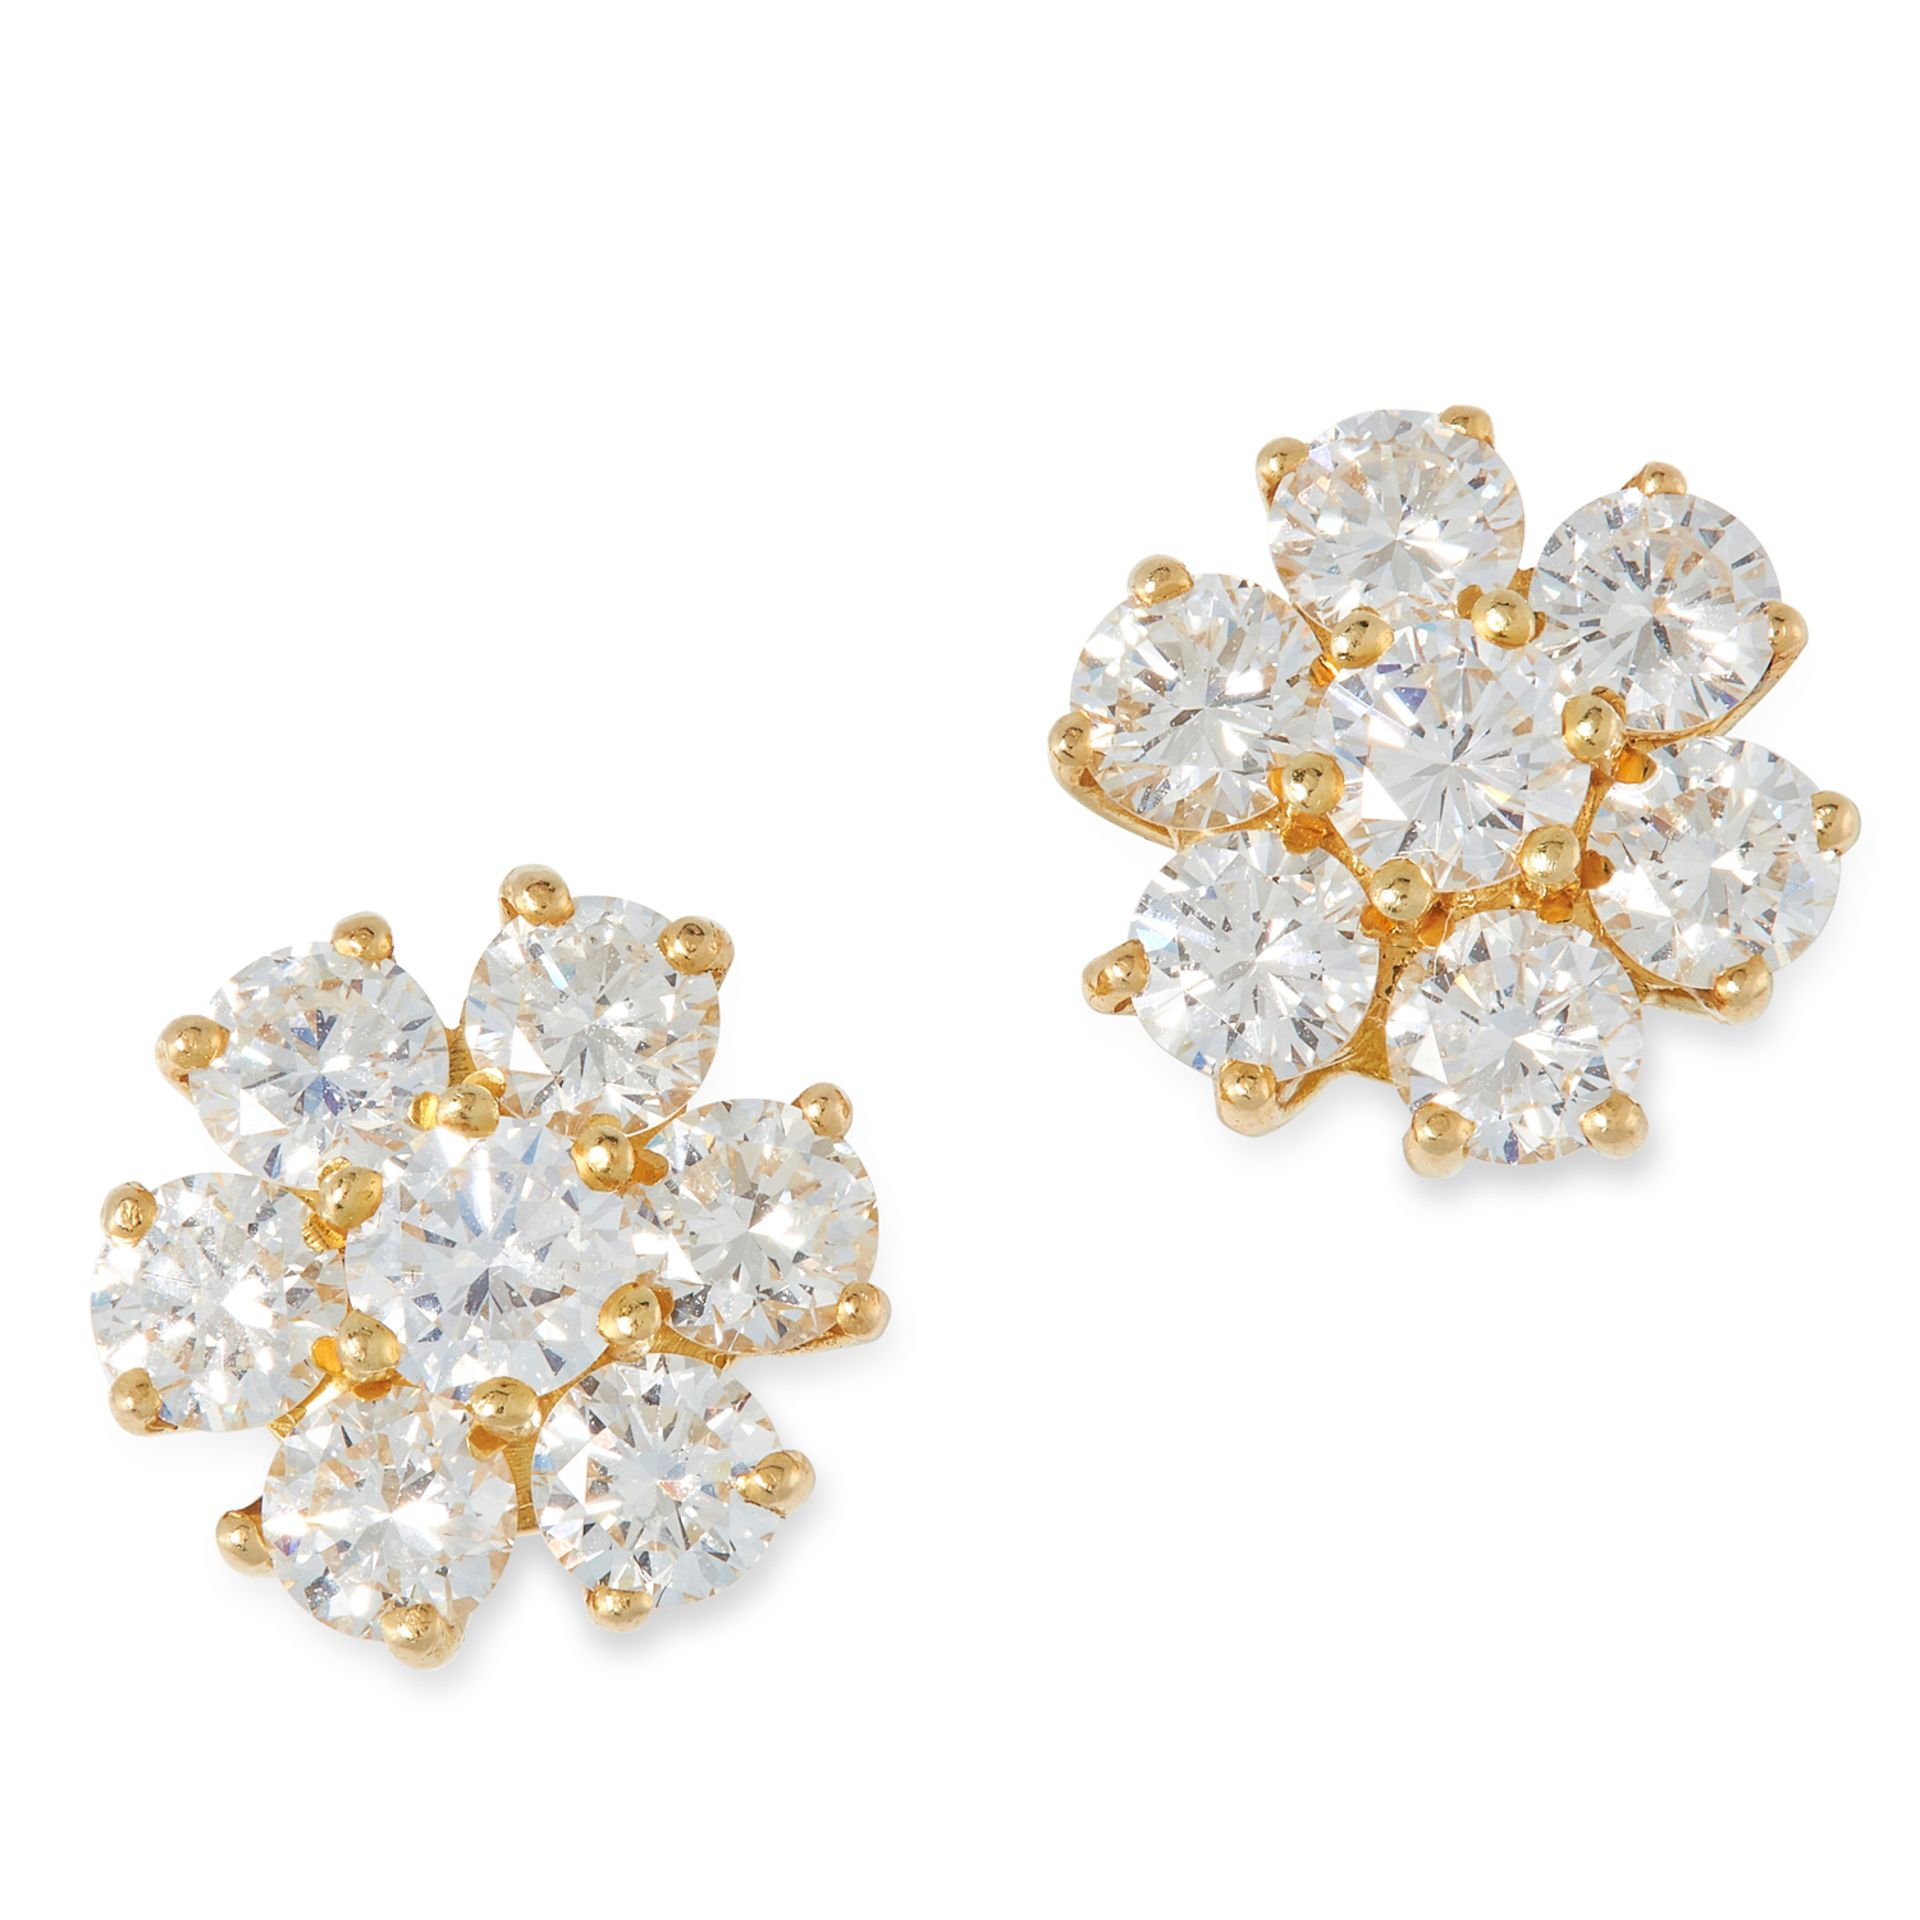 A PAIR OF DIAMOND CLUSTER EARRINGS set with round cut diamonds totalling 2.36 carats, marked